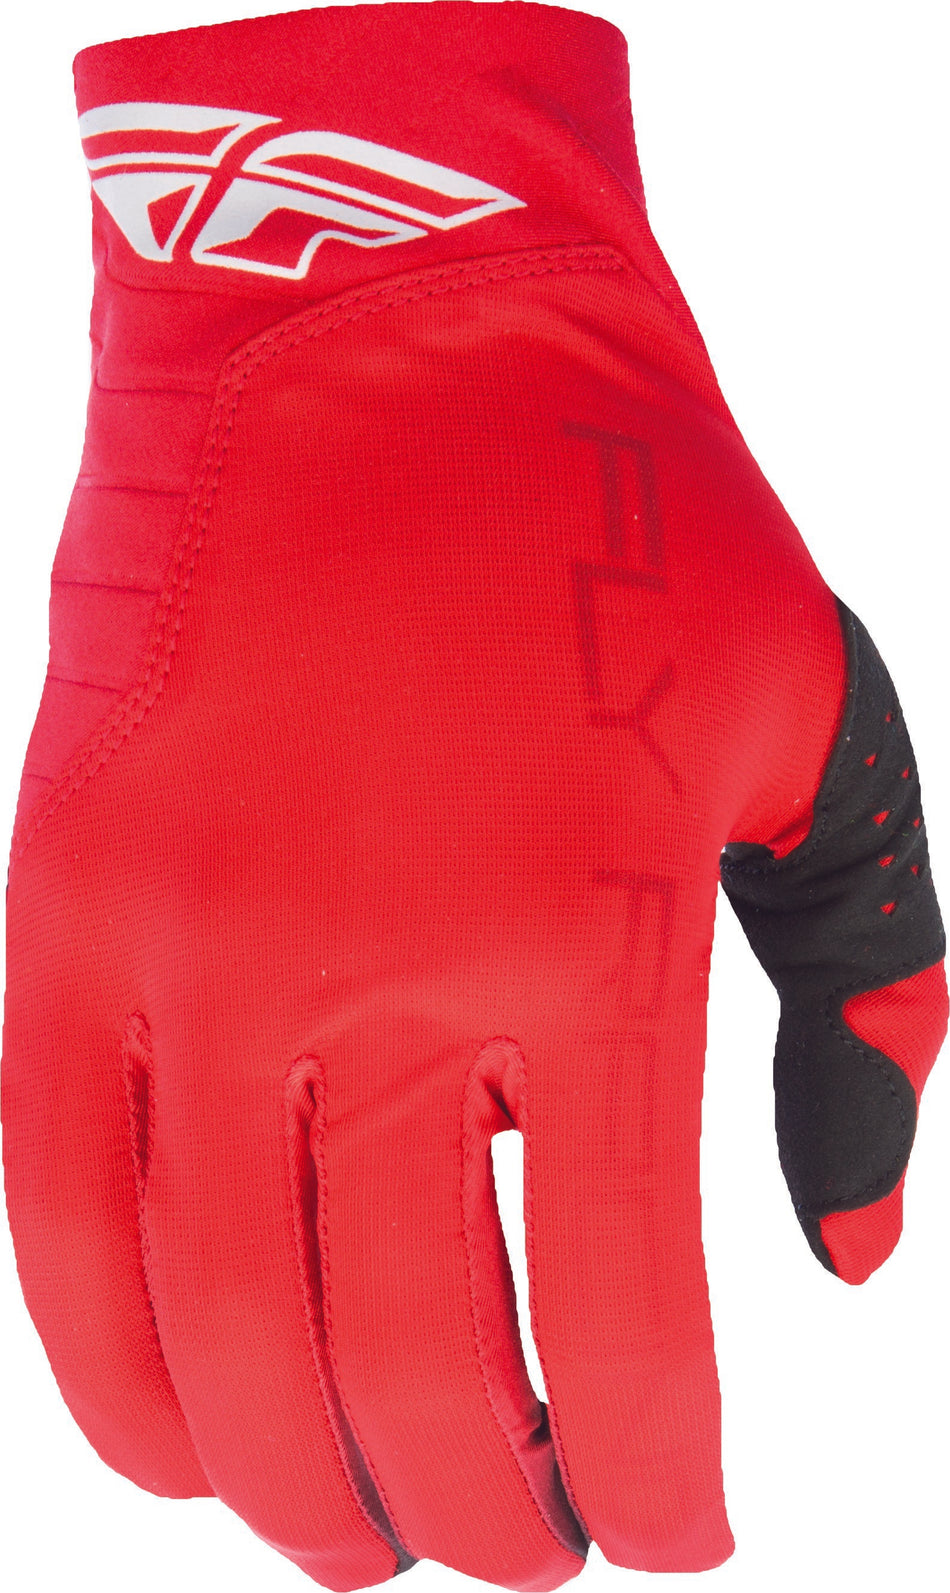 FLY RACING Pro Lite Glove Red Sz 9 M 370-81209